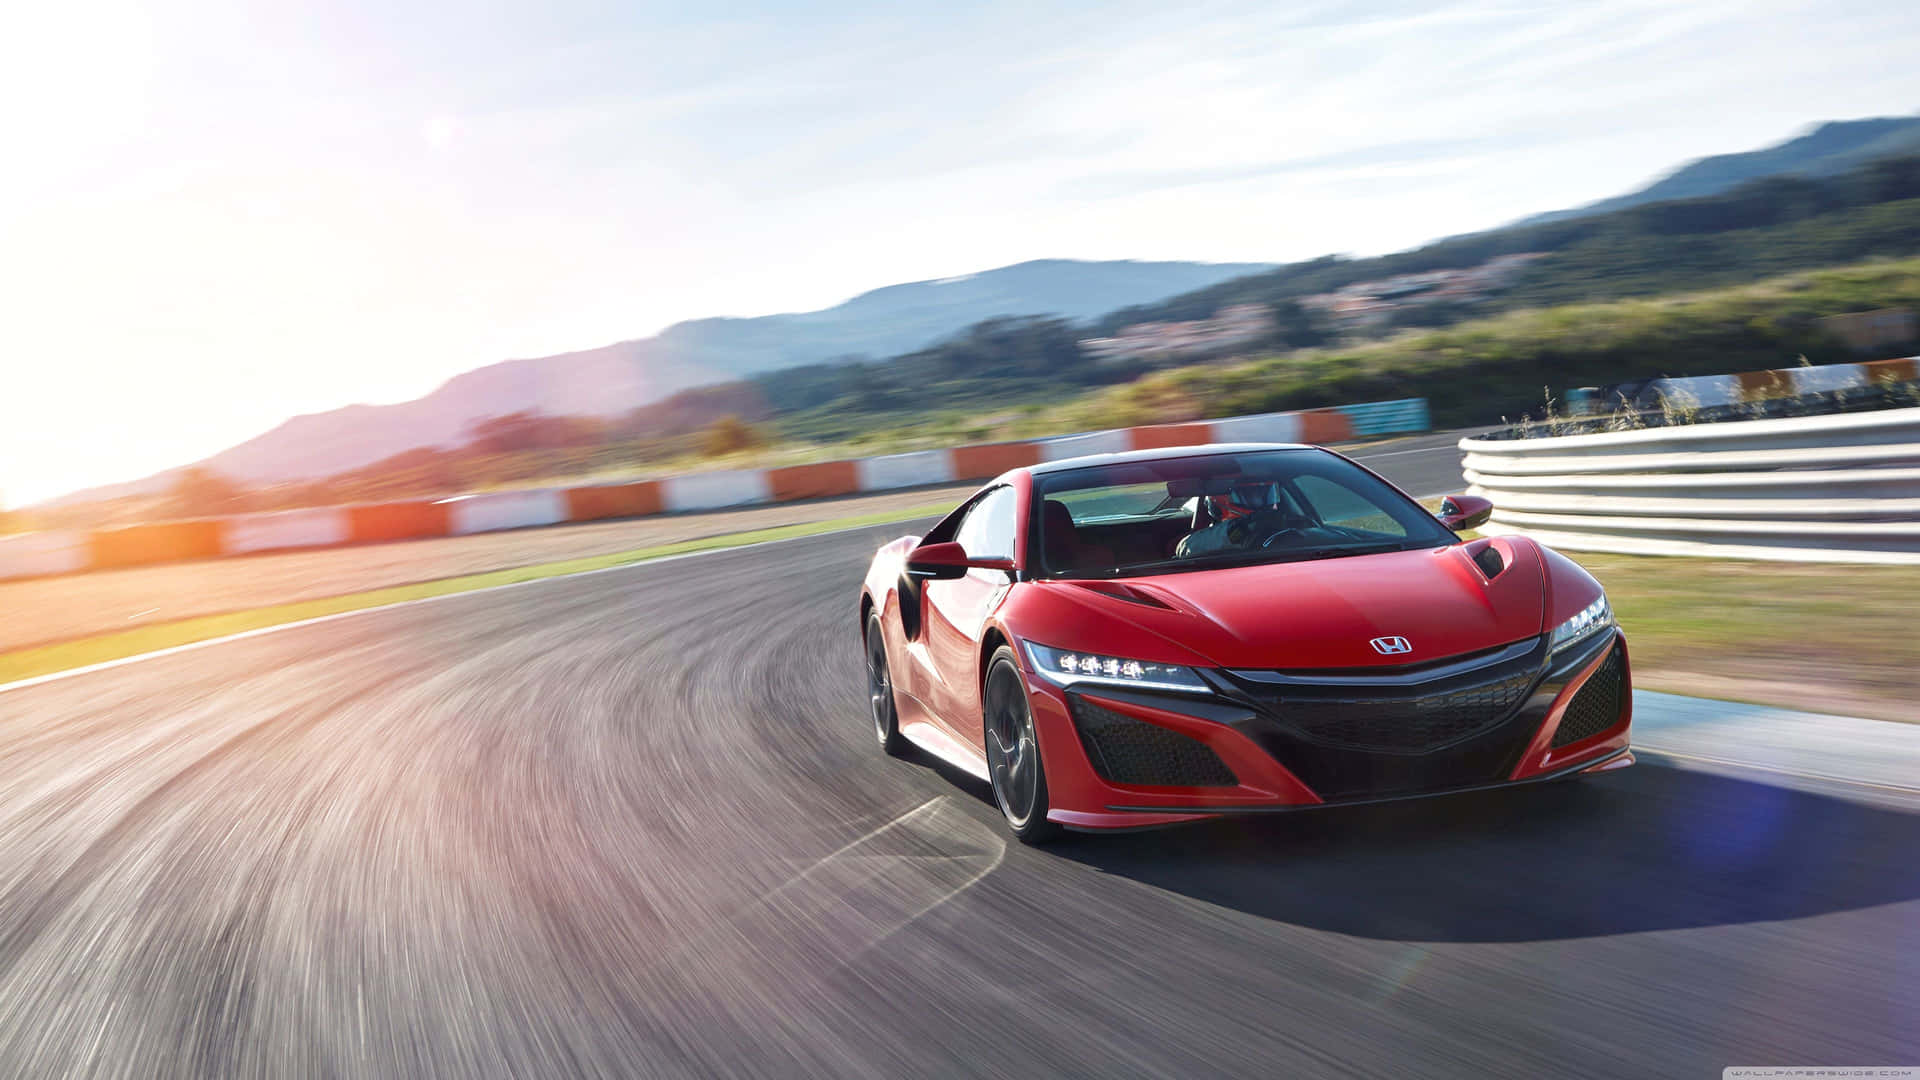 The Red Honda Nsx Is Driving On A Track Wallpaper